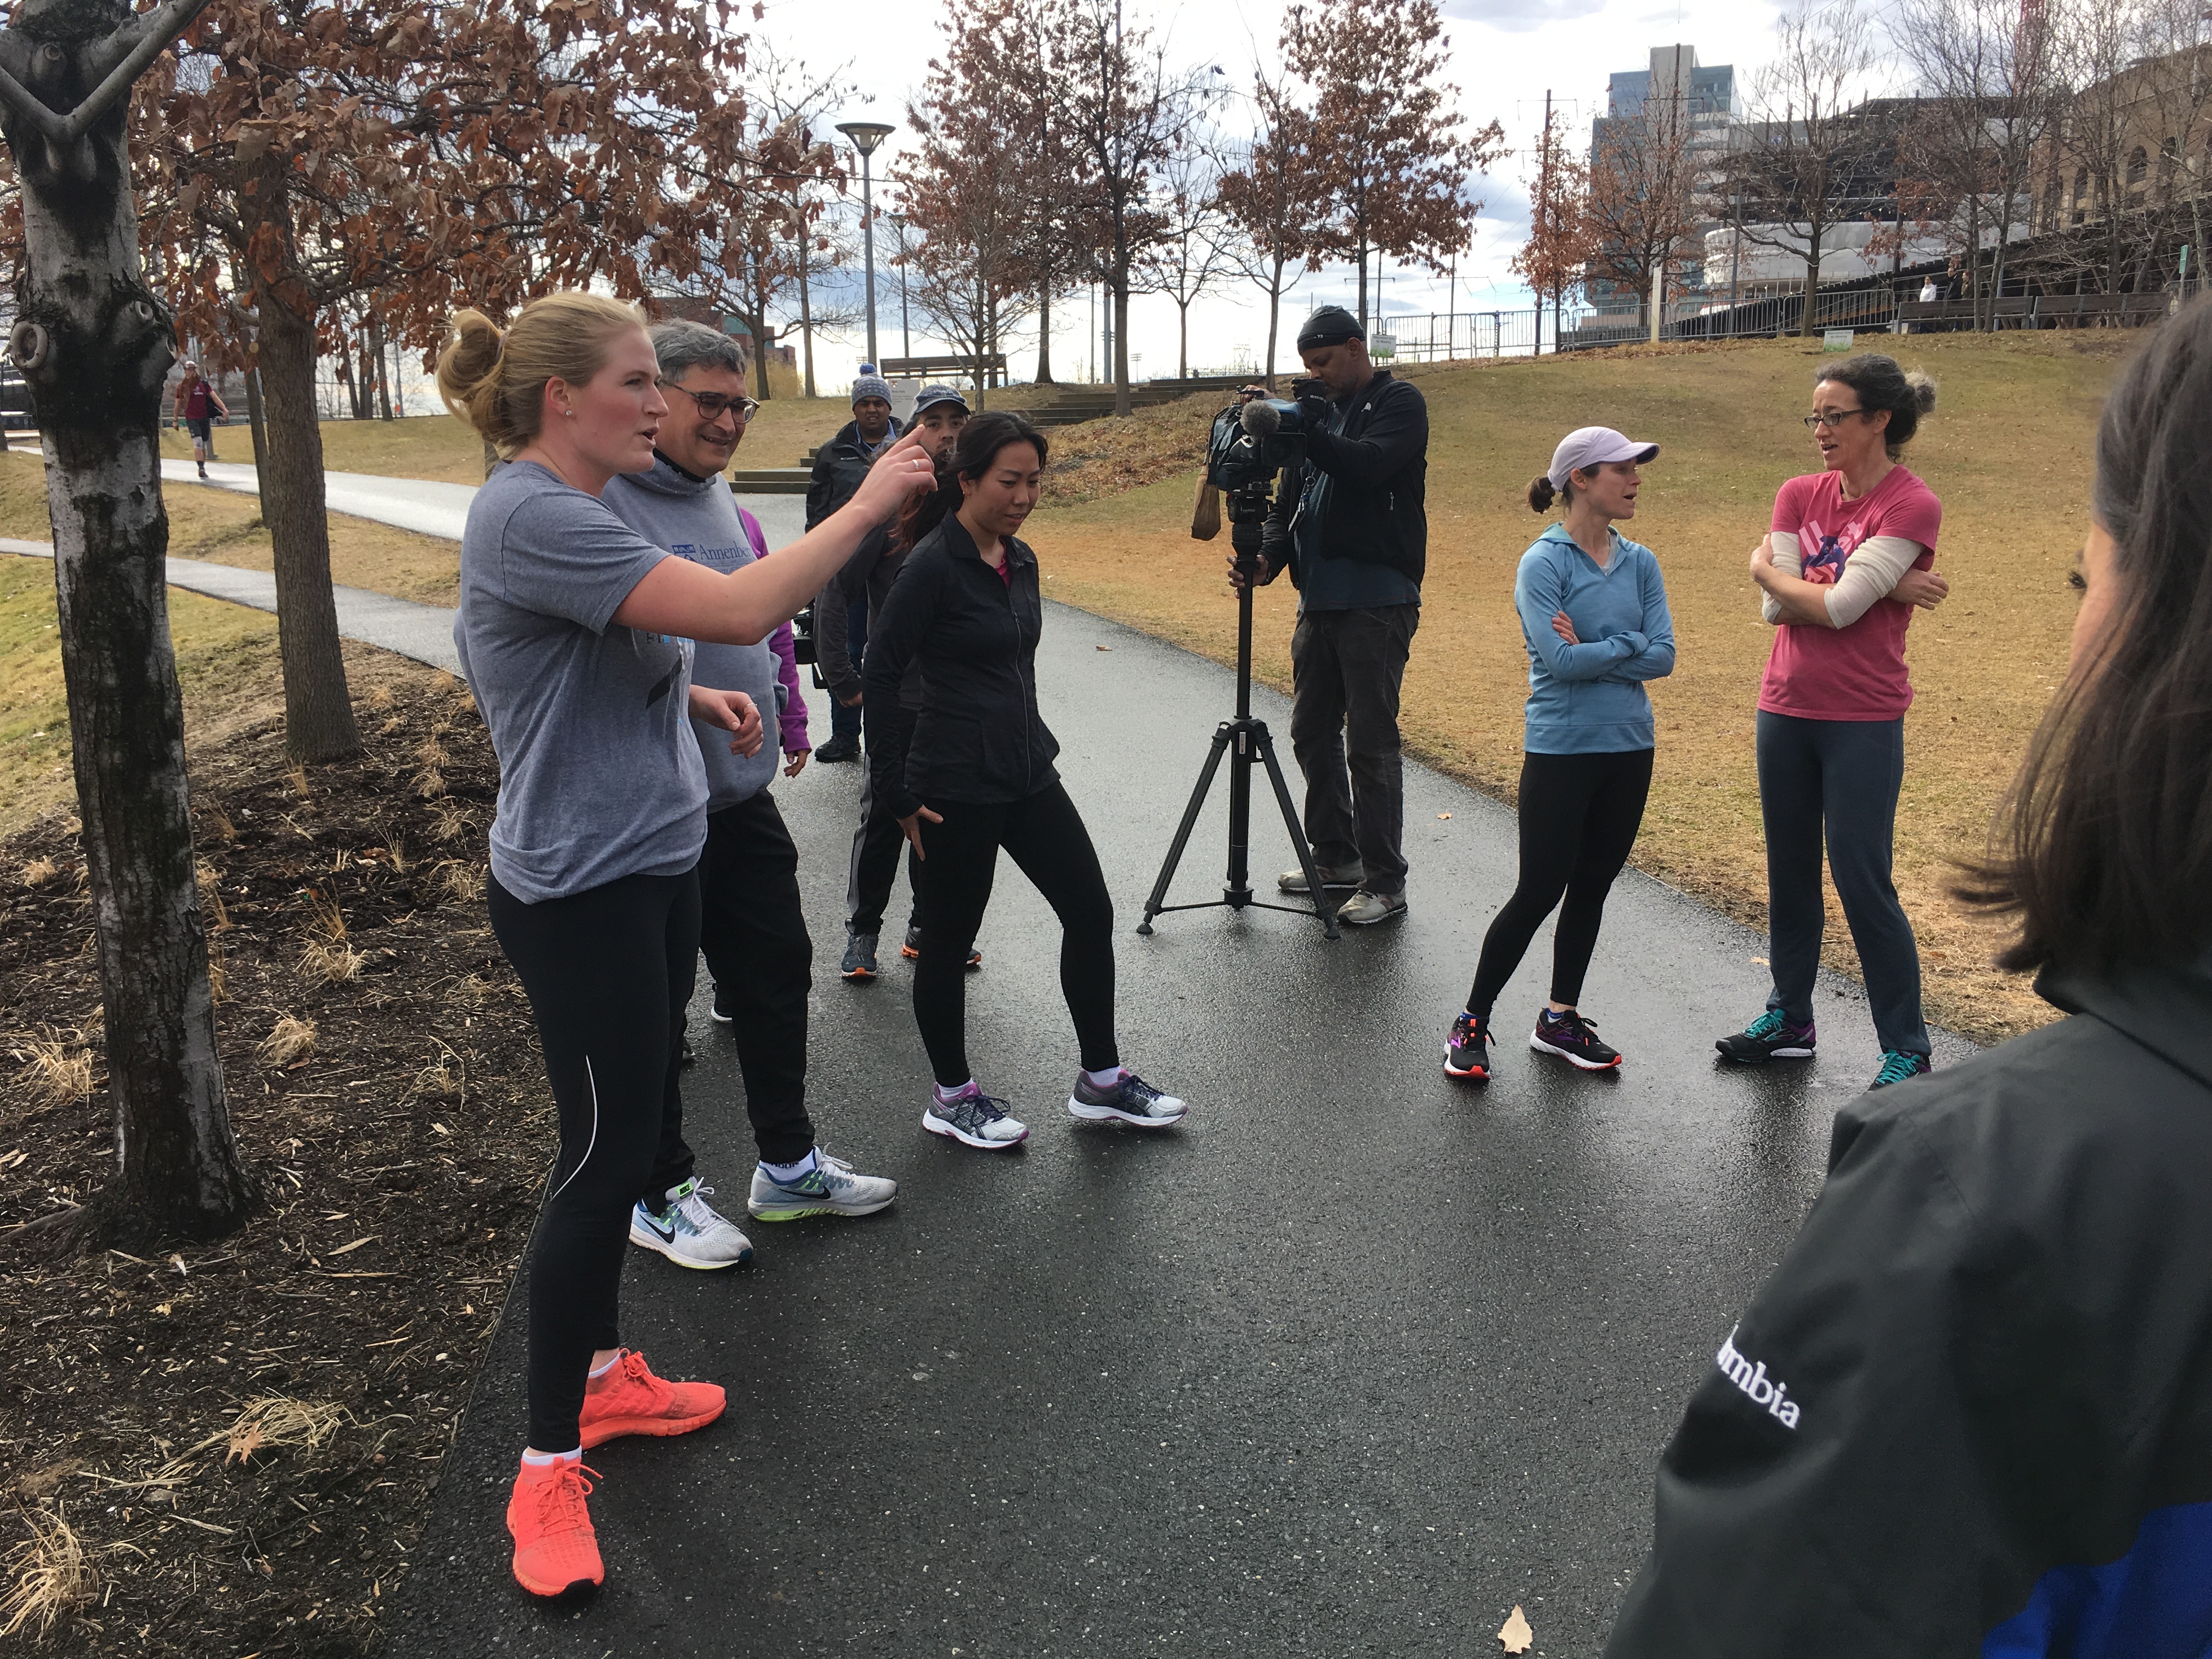 People in exercise clothing standing in a group on a path talk while a videocamera person takes footage.